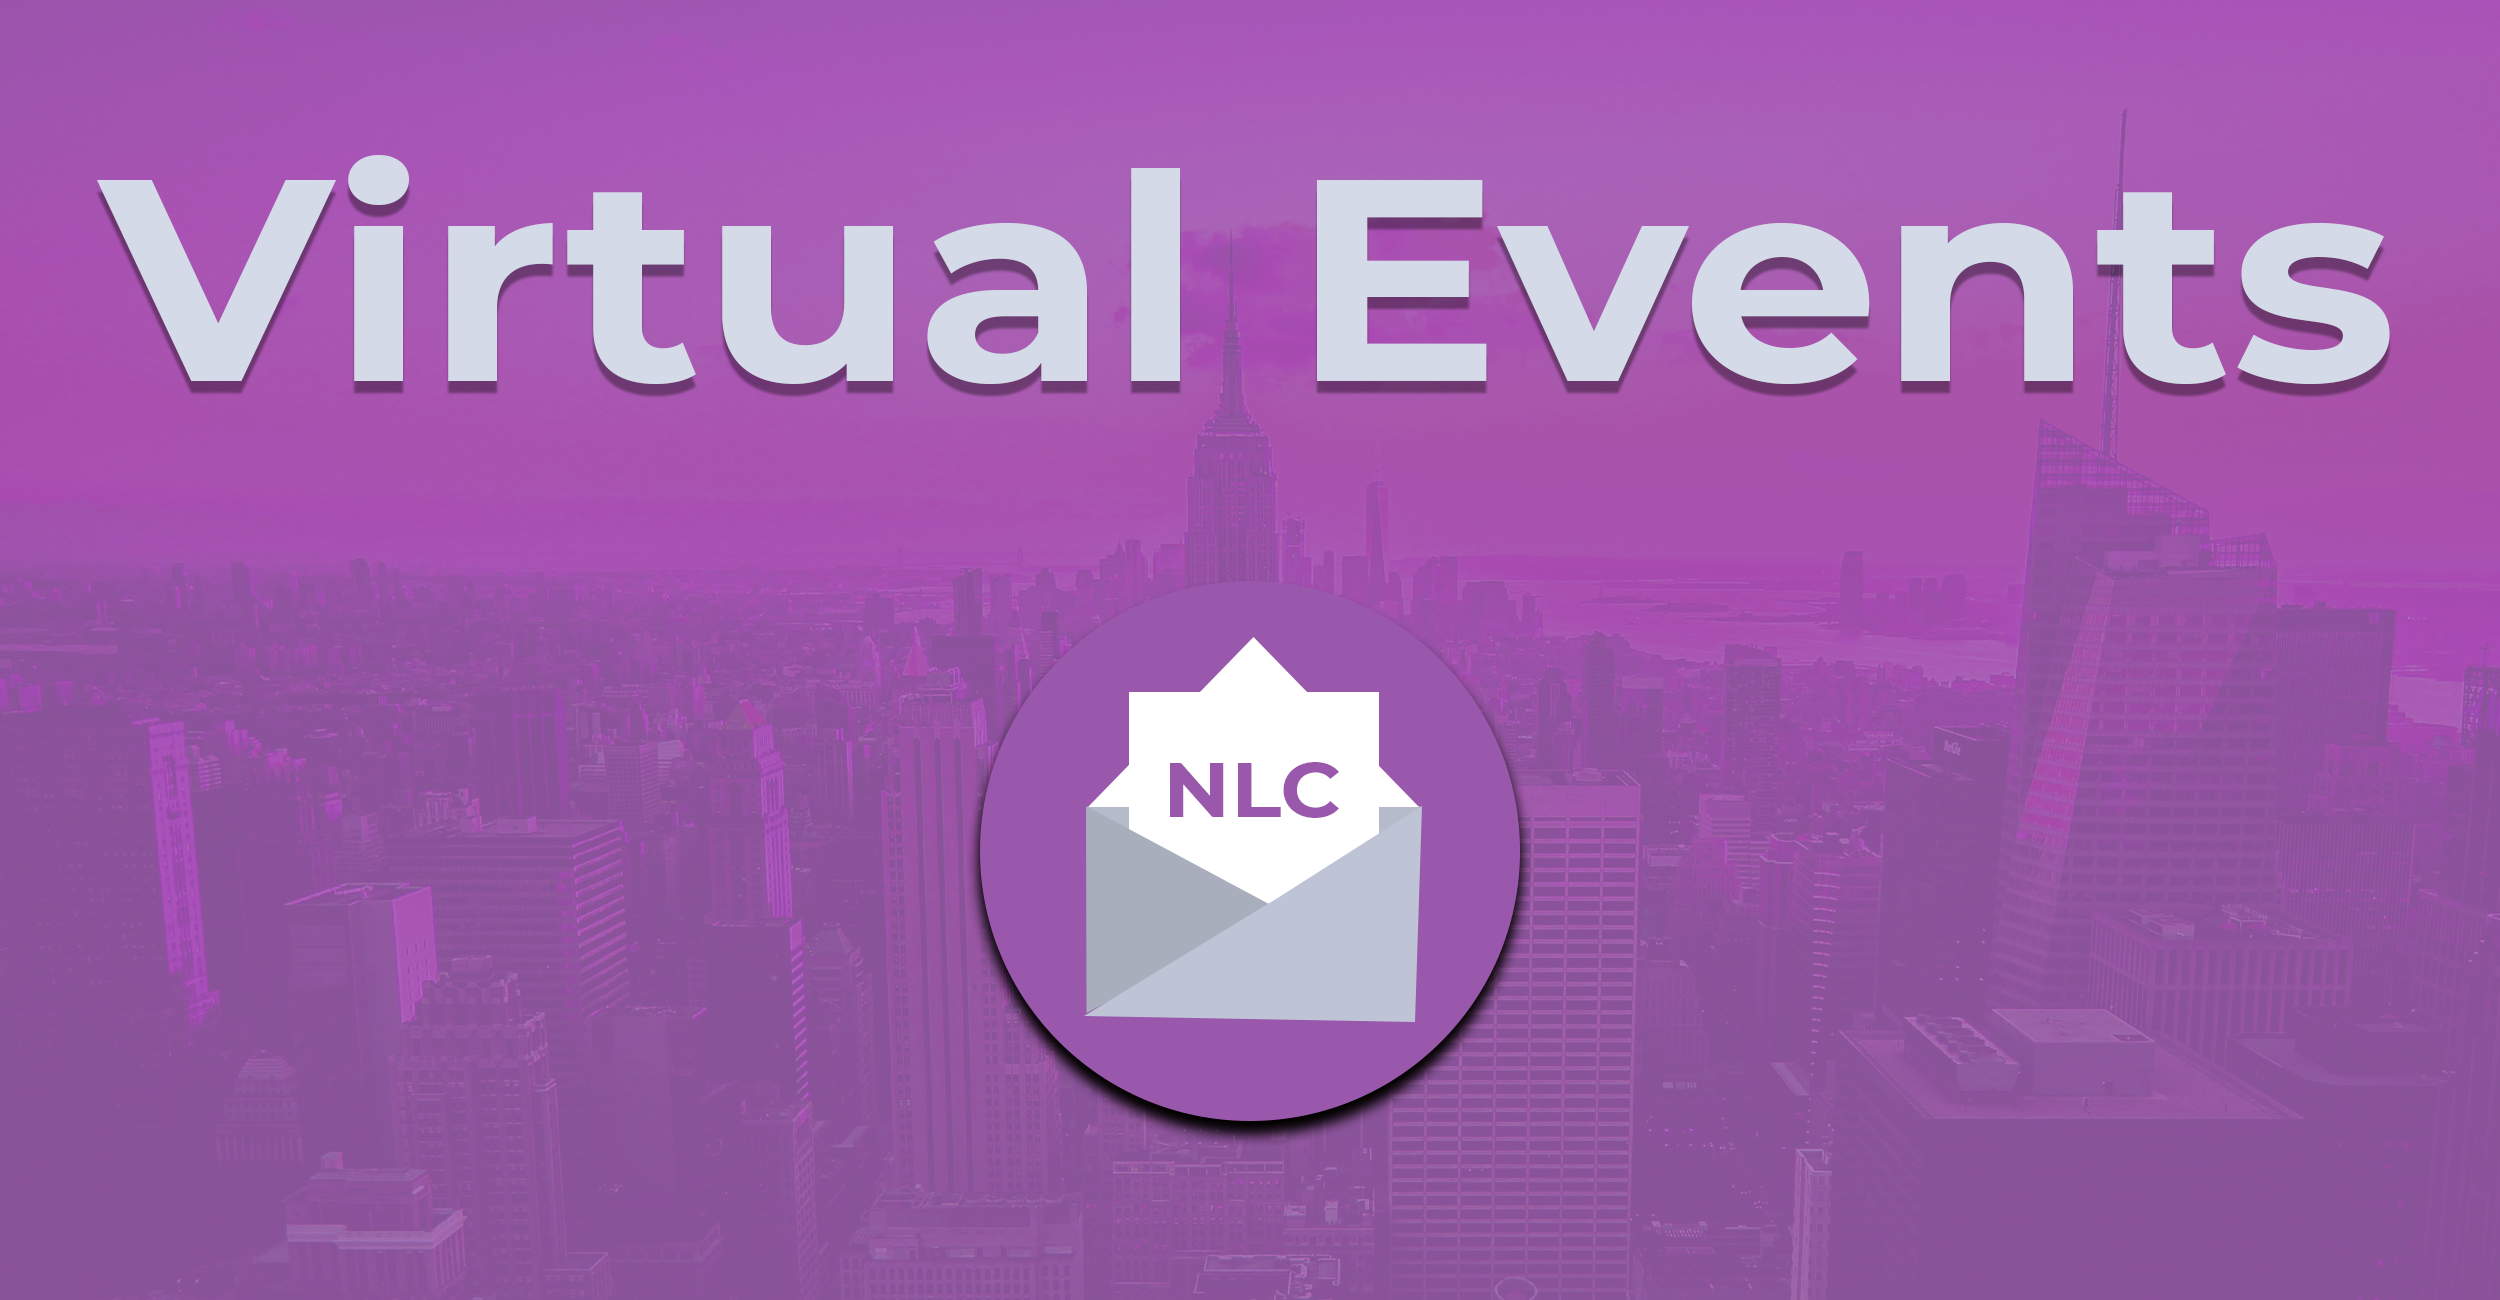 NLC-AreasofExpertise-virtualevents.png